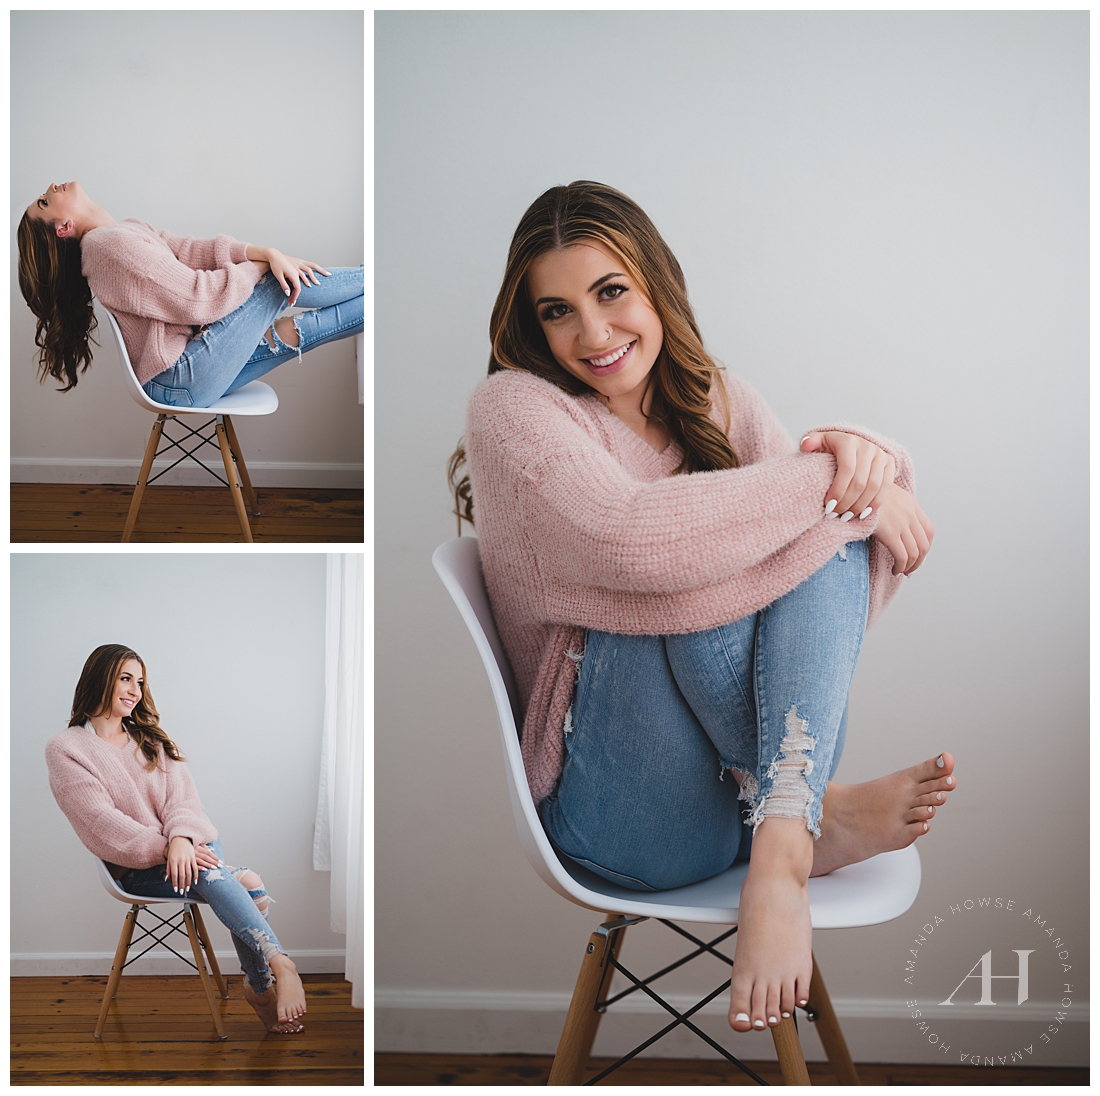 Posing Senior Portraits With White Chair | Cozy Chunky Sweater and Ripped Jeans | Photographed by the Best Tacoma, Washington Senior Photographer Amanda Howse Photography